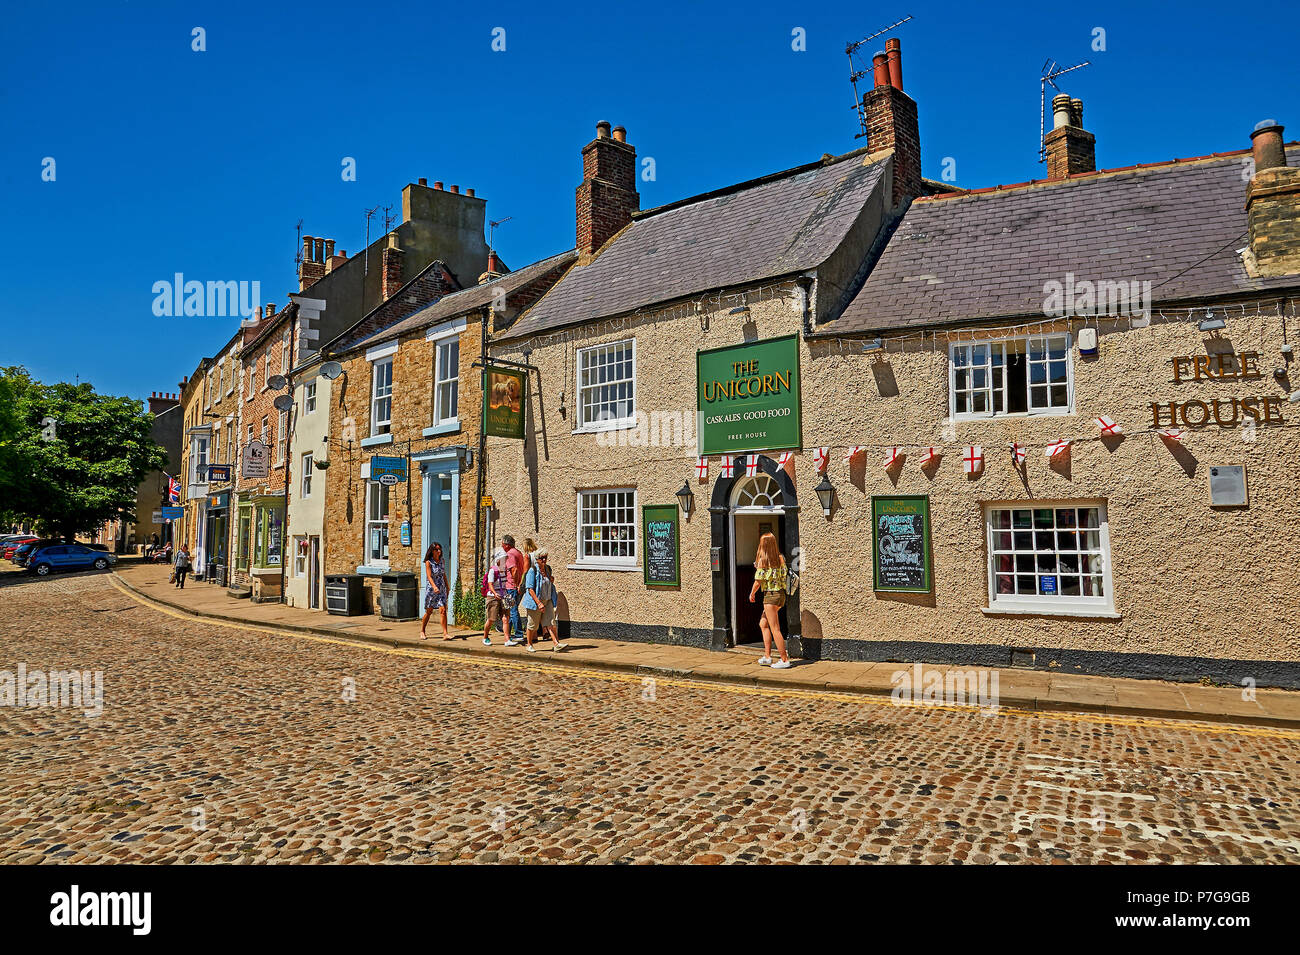 The Unicorn public house and ornate buildings line a cobbled street in  the North Yorkshire market town of Richmond. Stock Photo